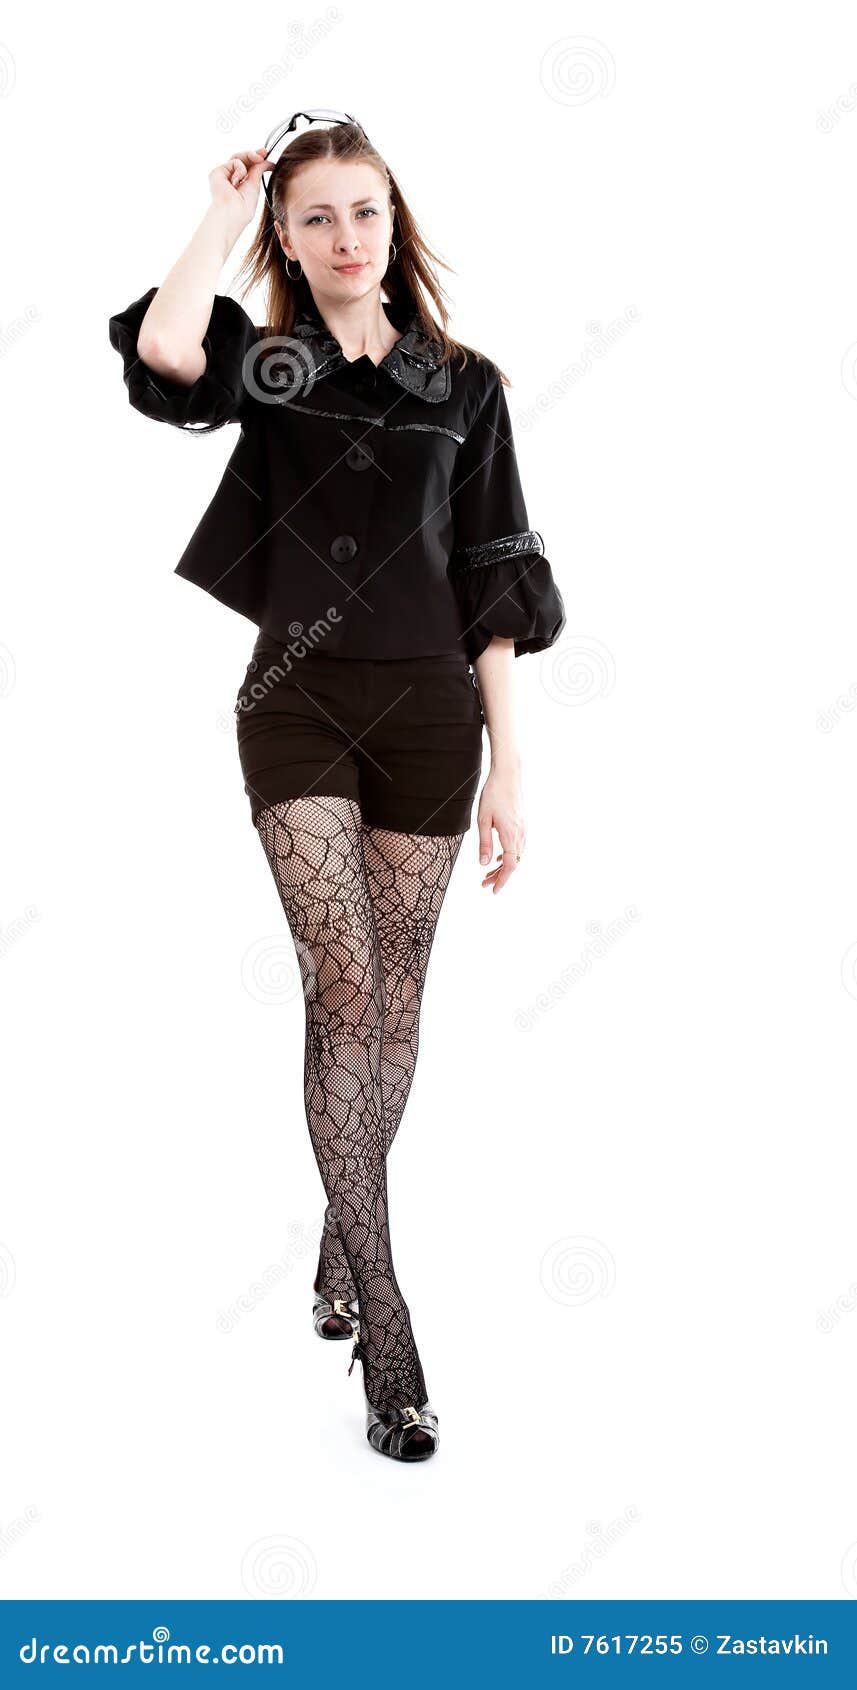 Girl in stockings stock image. Image of fashion, woman - 7617255